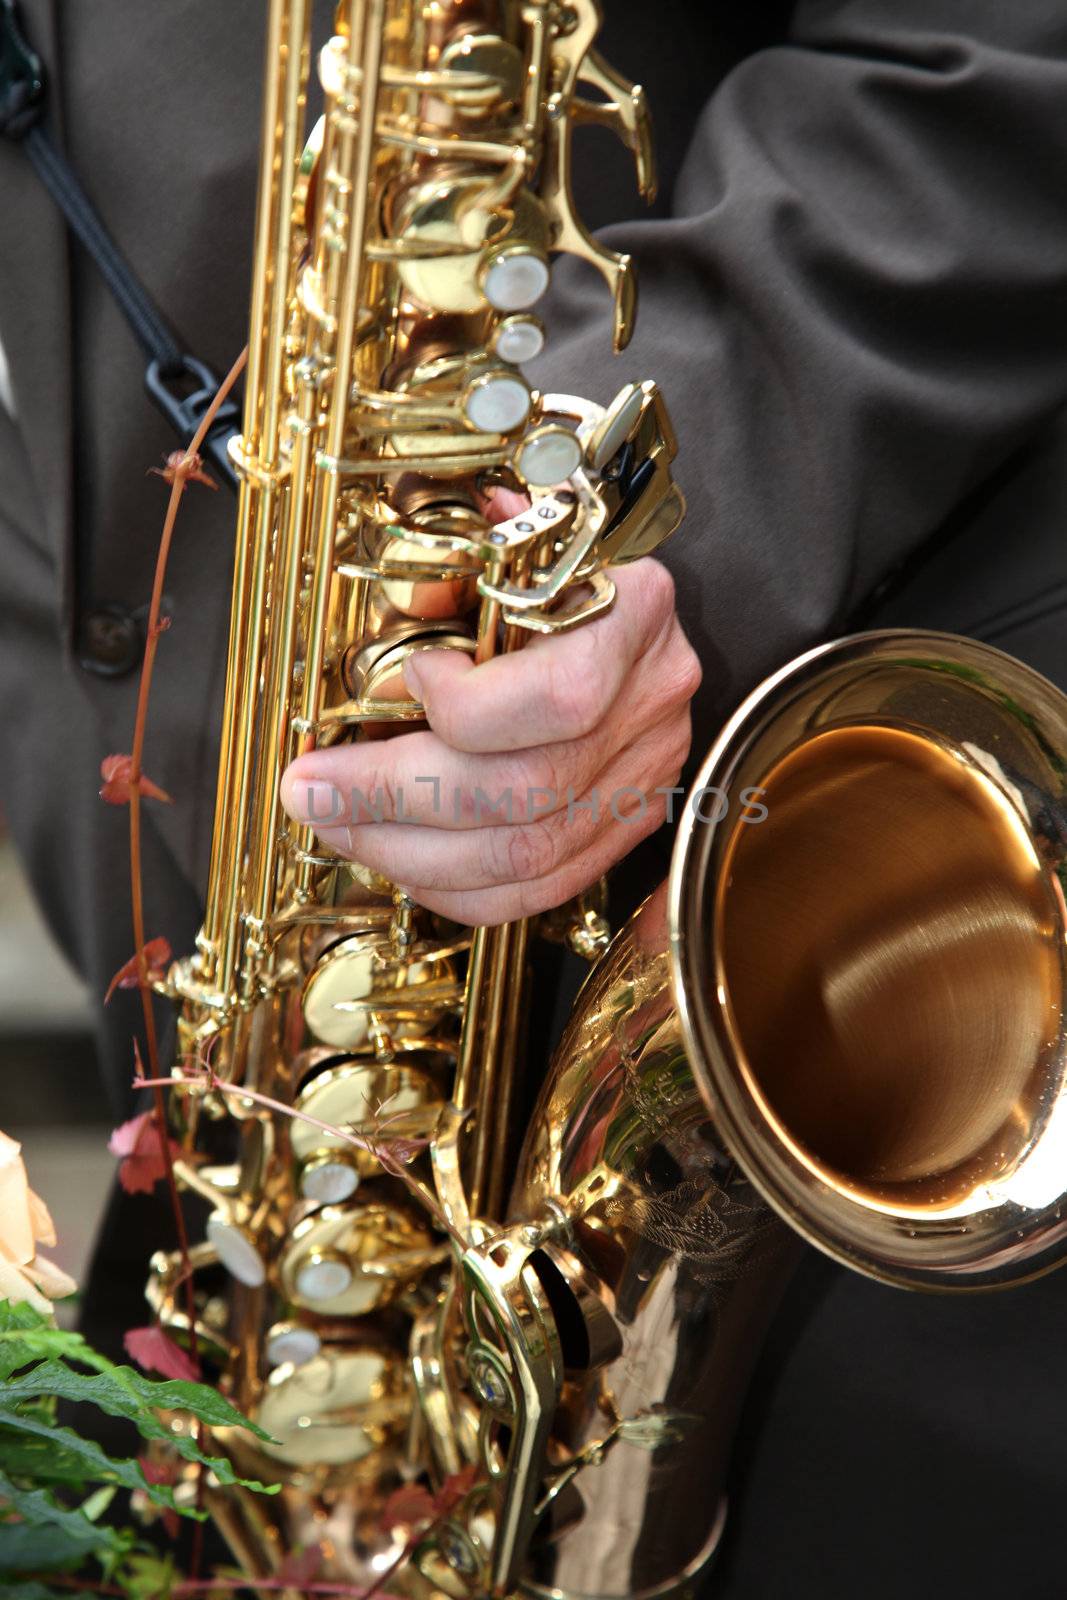 A saxophone player plays saxophone-only the saxophone can be seen